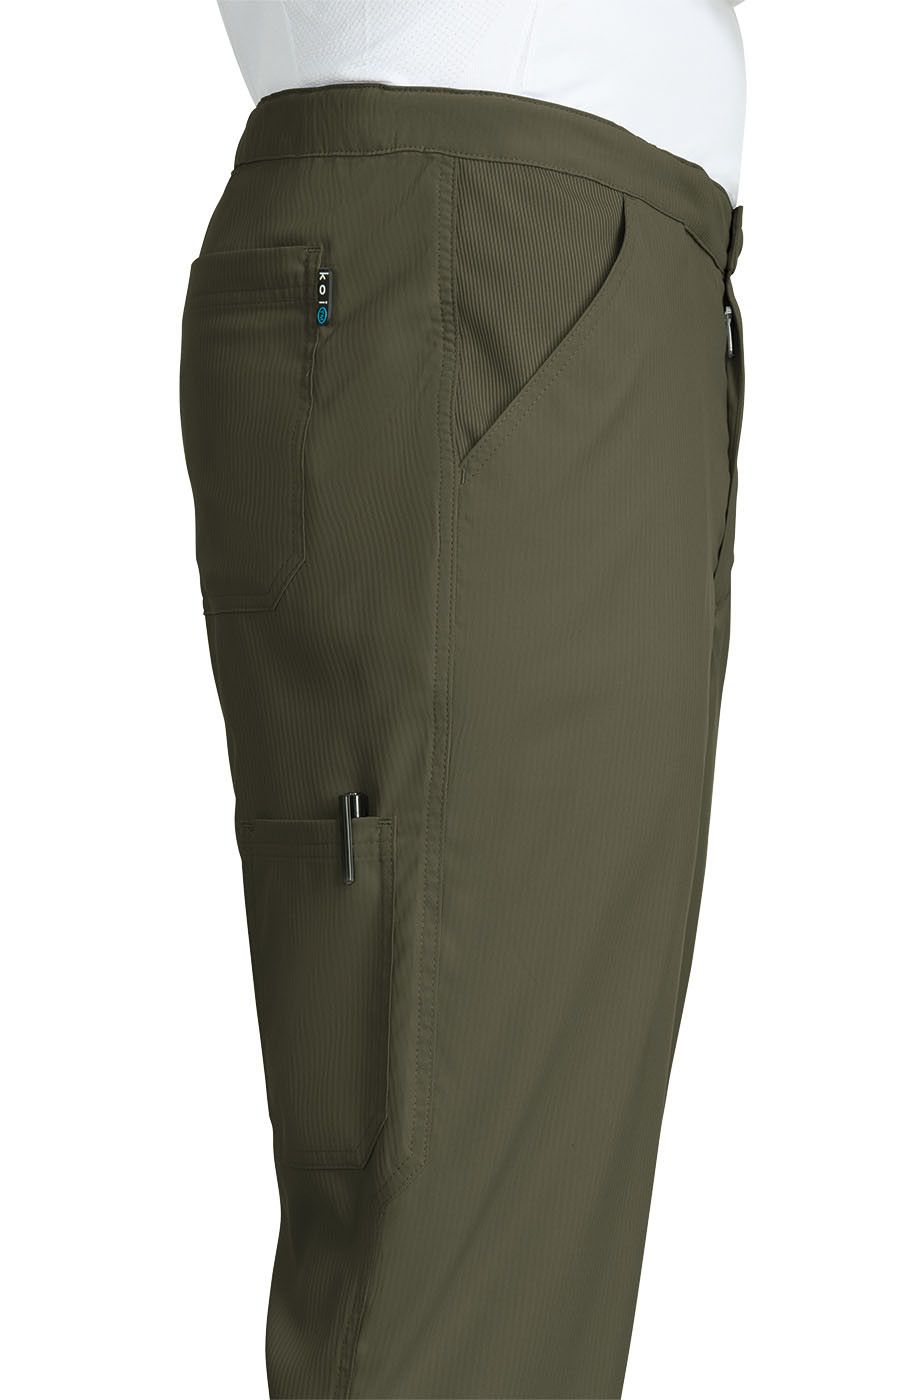 discovery-pant-olive-green